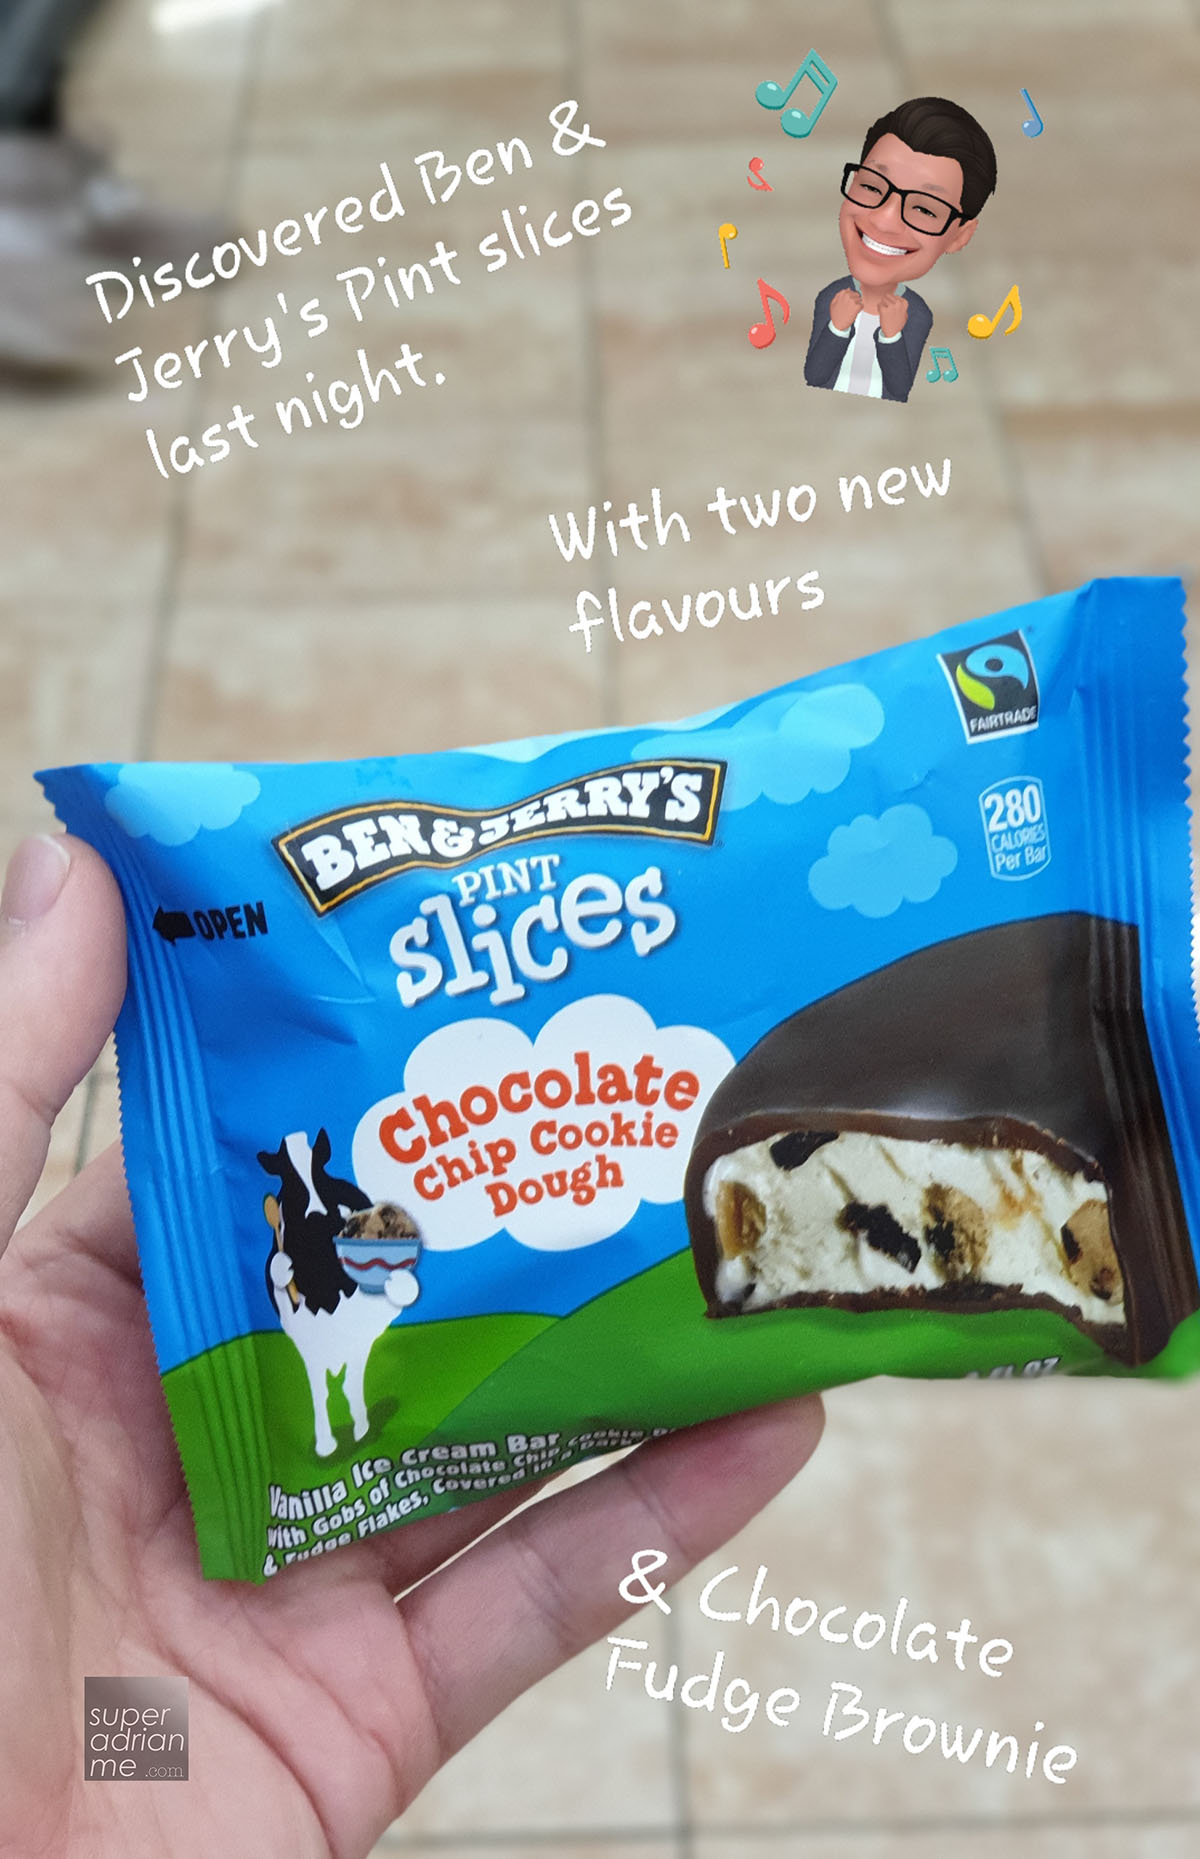 Keep Cool with Ben & Jerry's Pint Slices